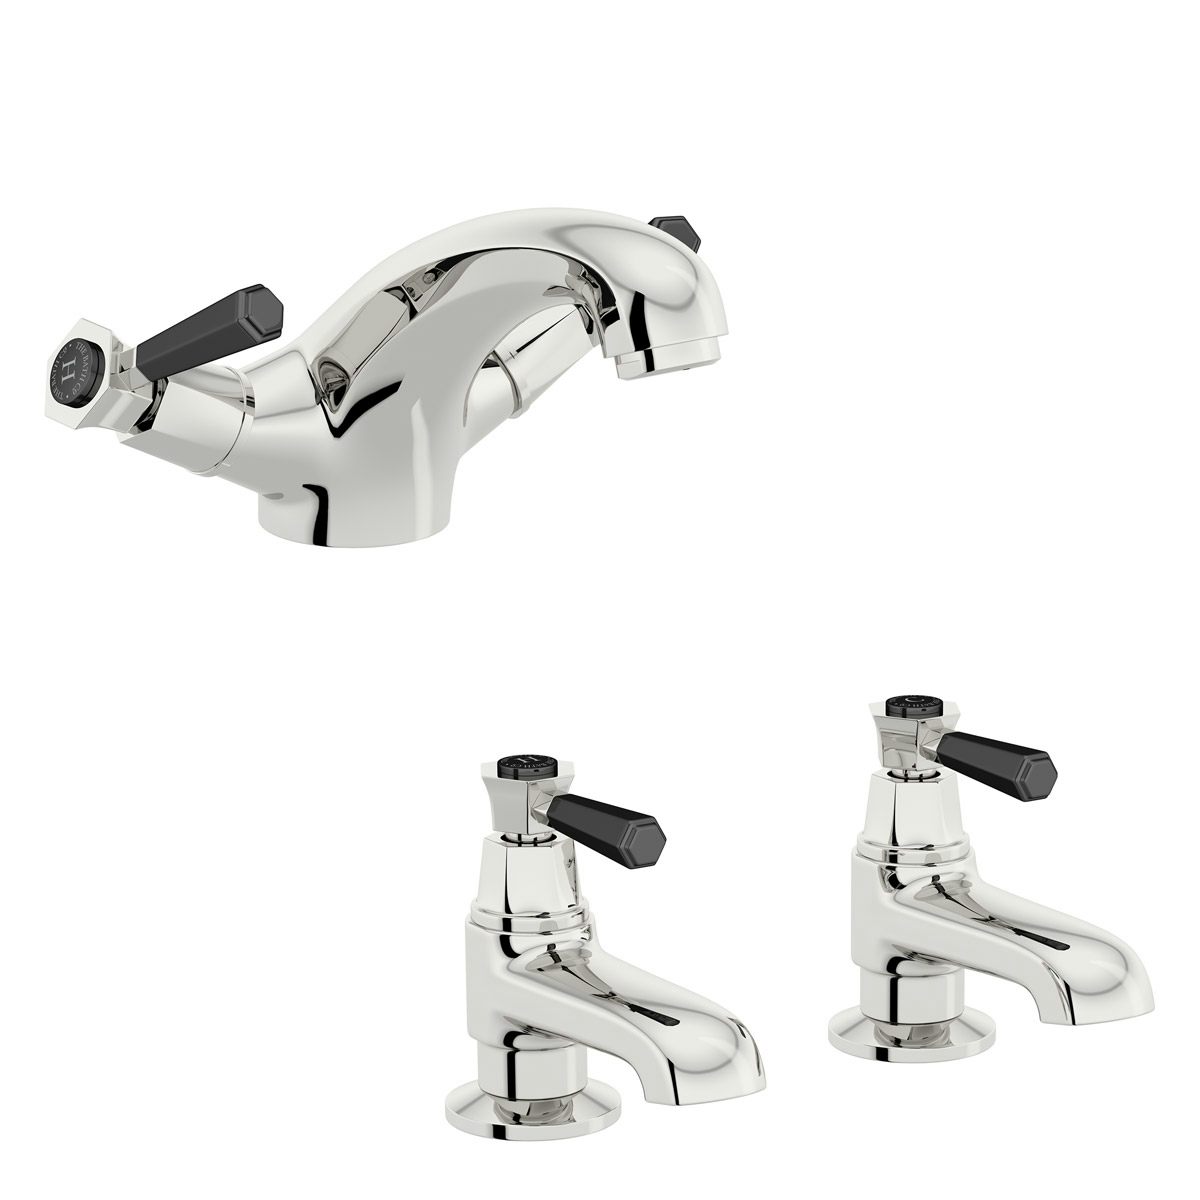 The Bath Co. Beaumont lever basin mixer and bath pillar tap pack